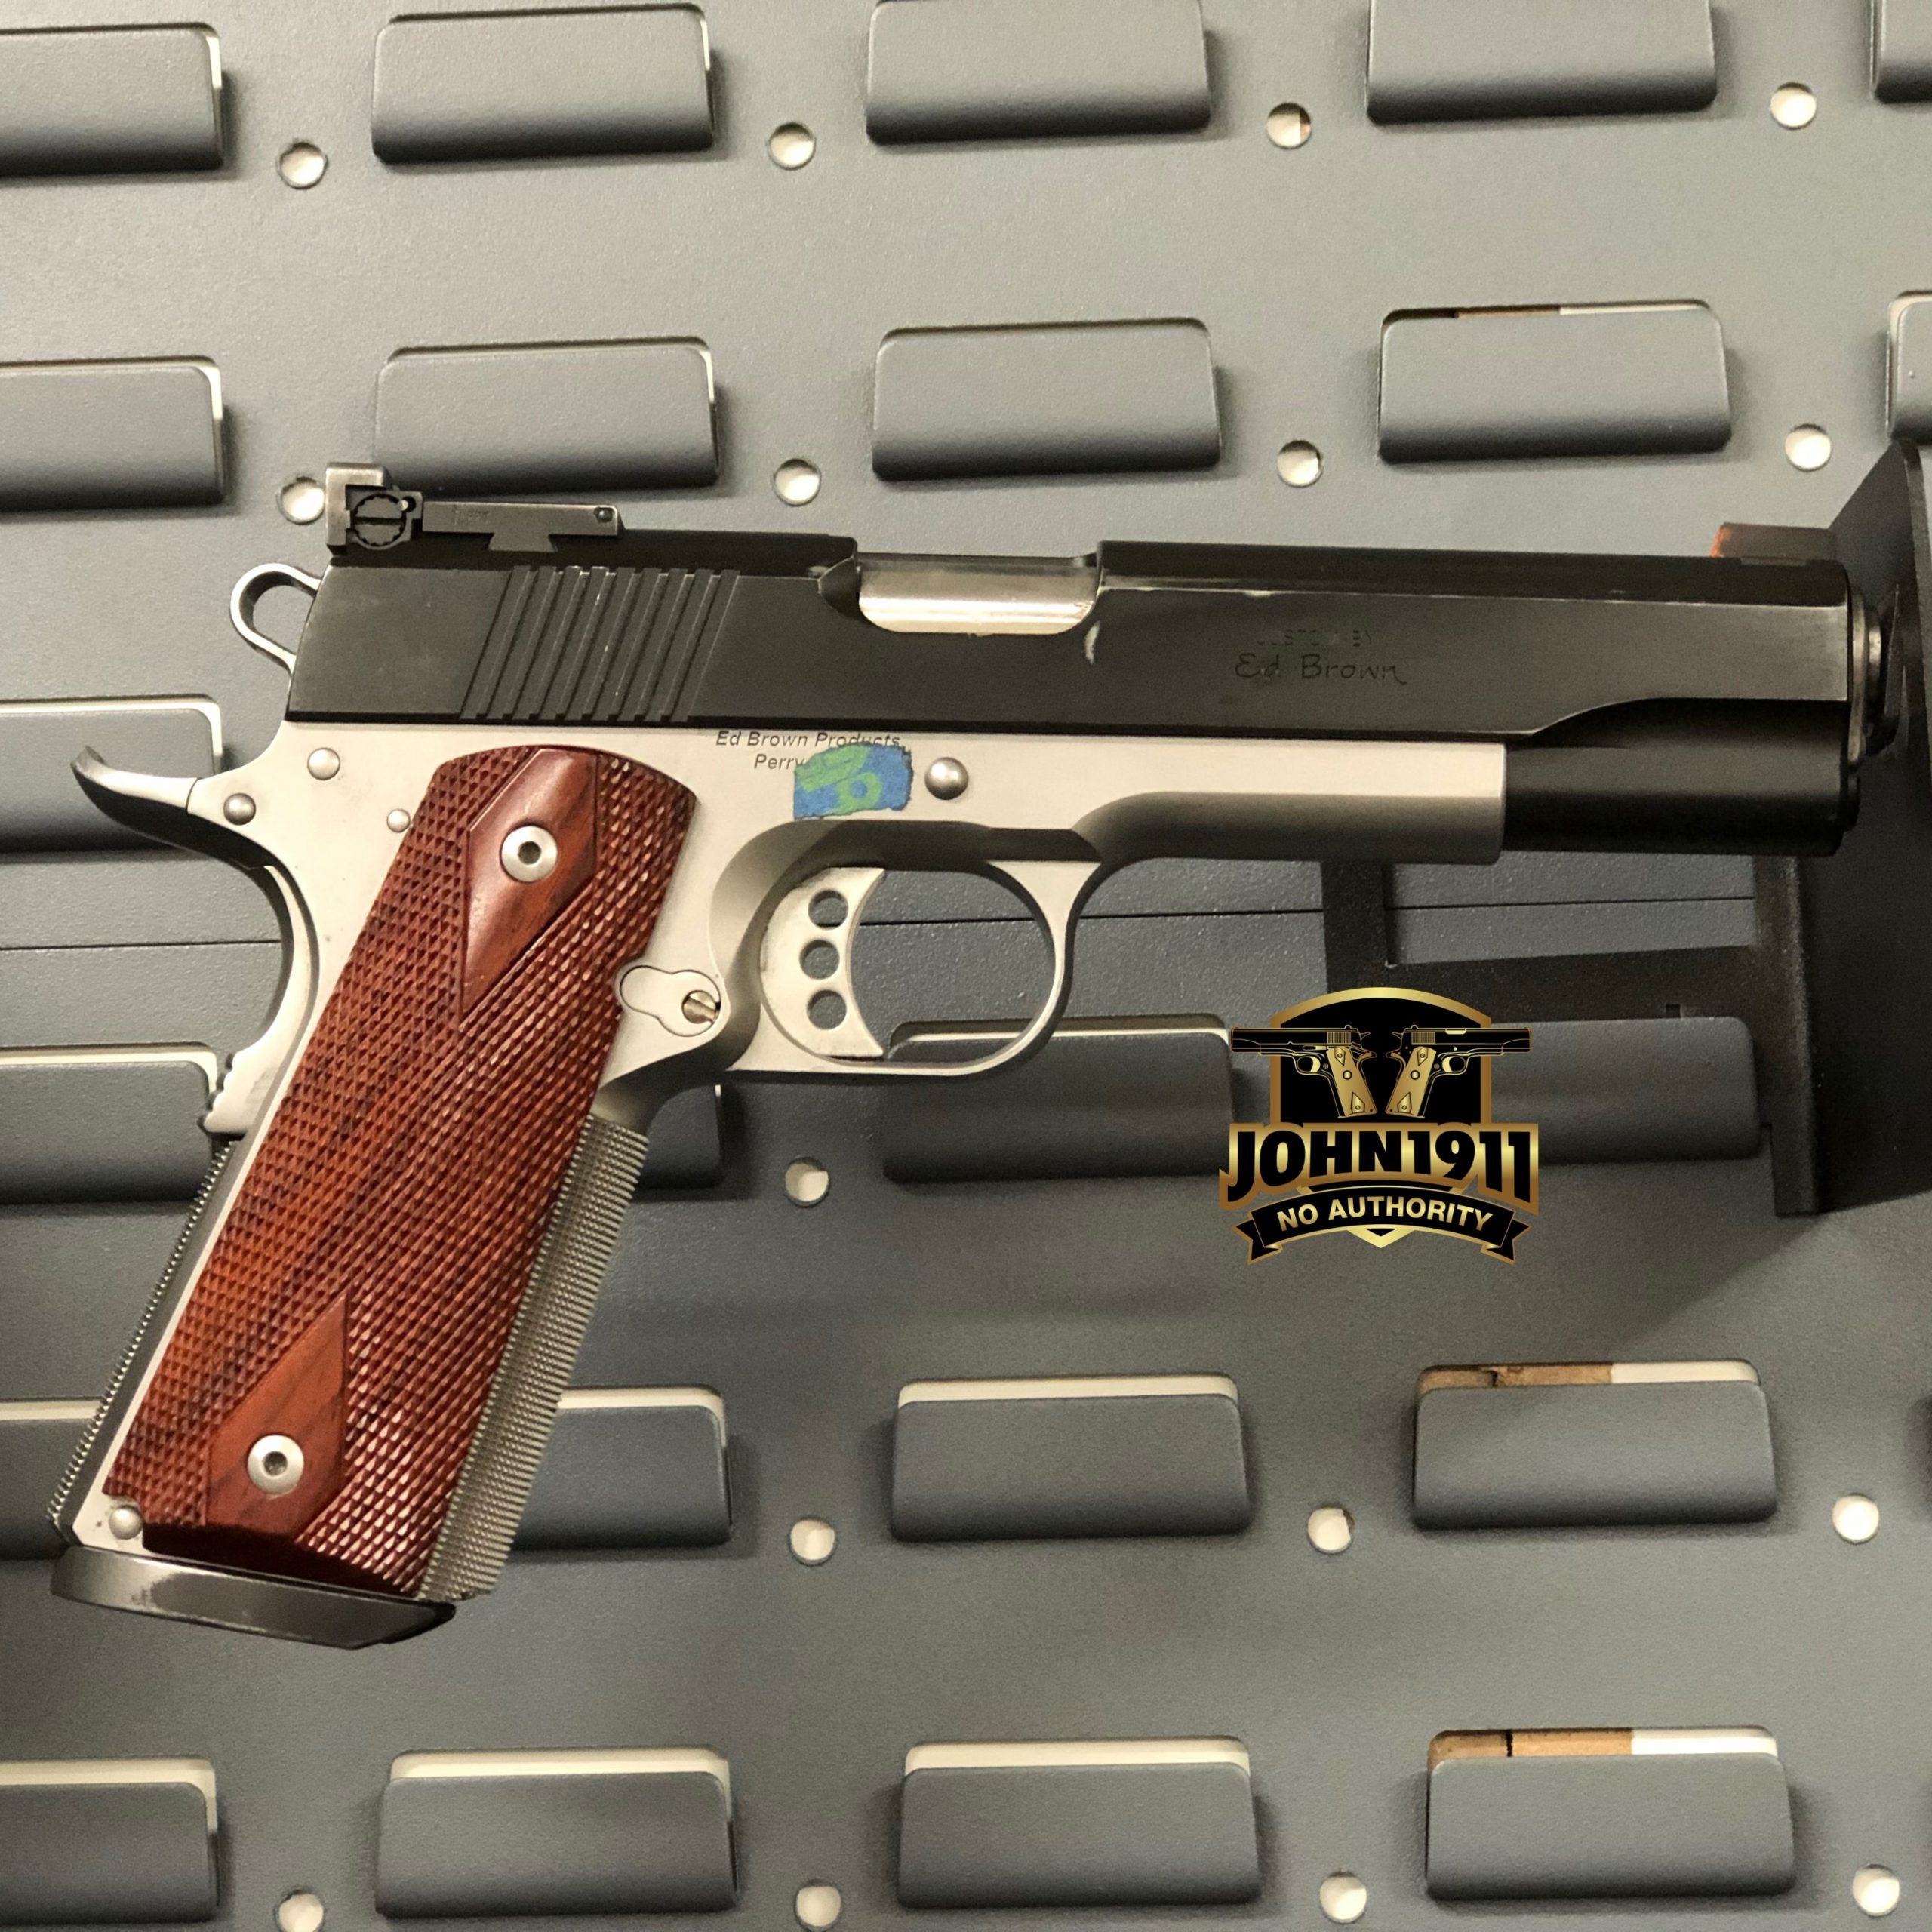 Ed Brown 1911 9mm - How Saturday Went